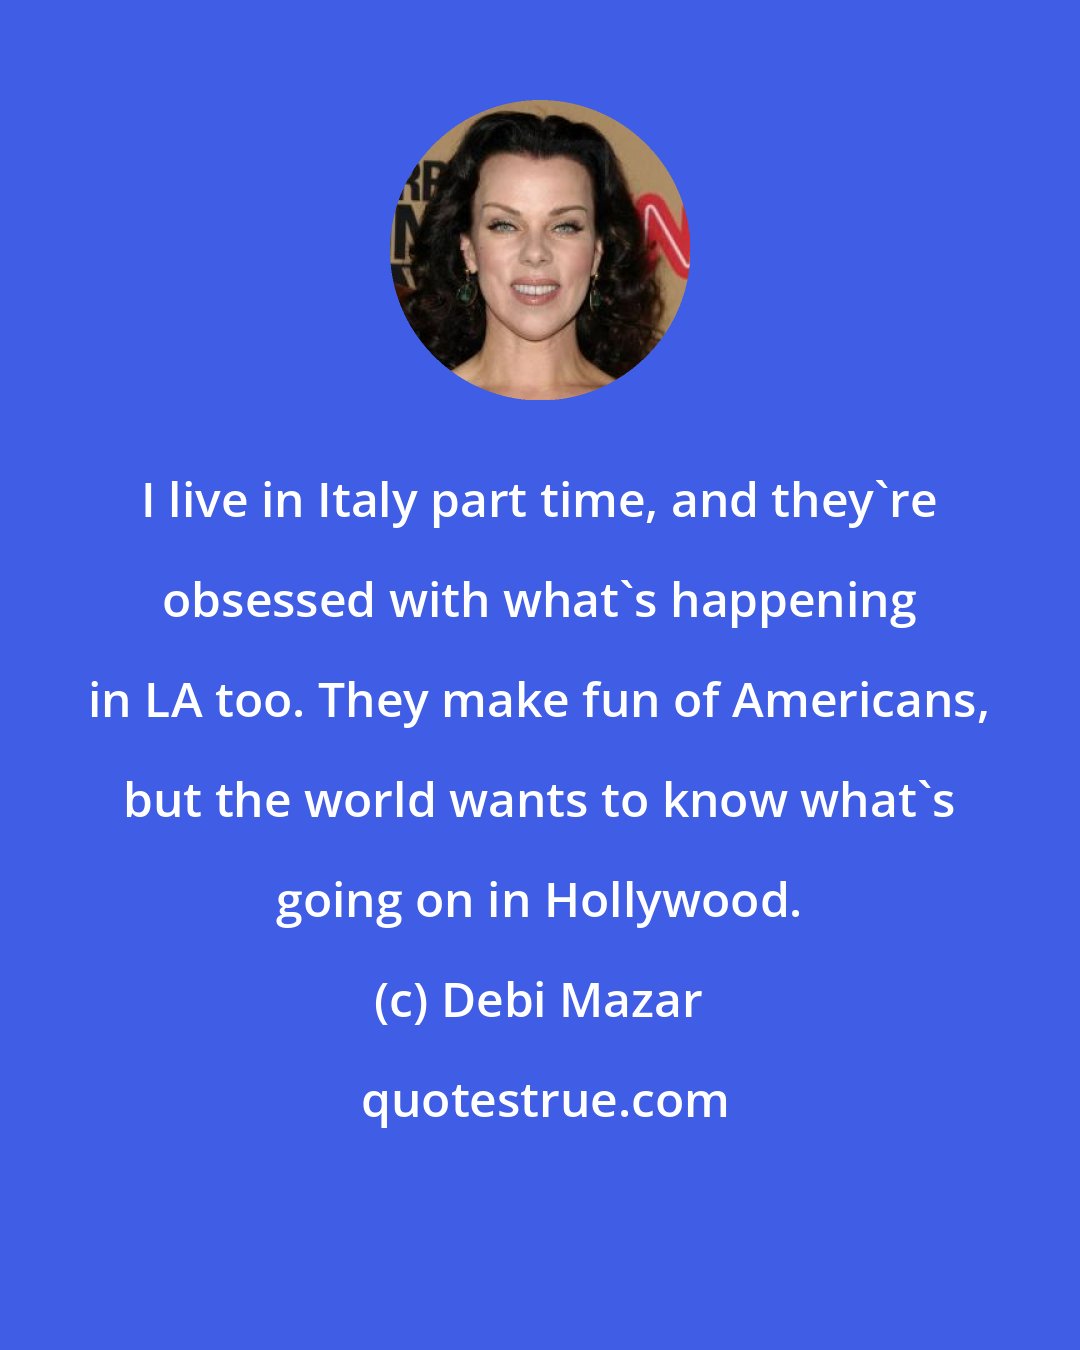 Debi Mazar: I live in Italy part time, and they're obsessed with what's happening in LA too. They make fun of Americans, but the world wants to know what's going on in Hollywood.